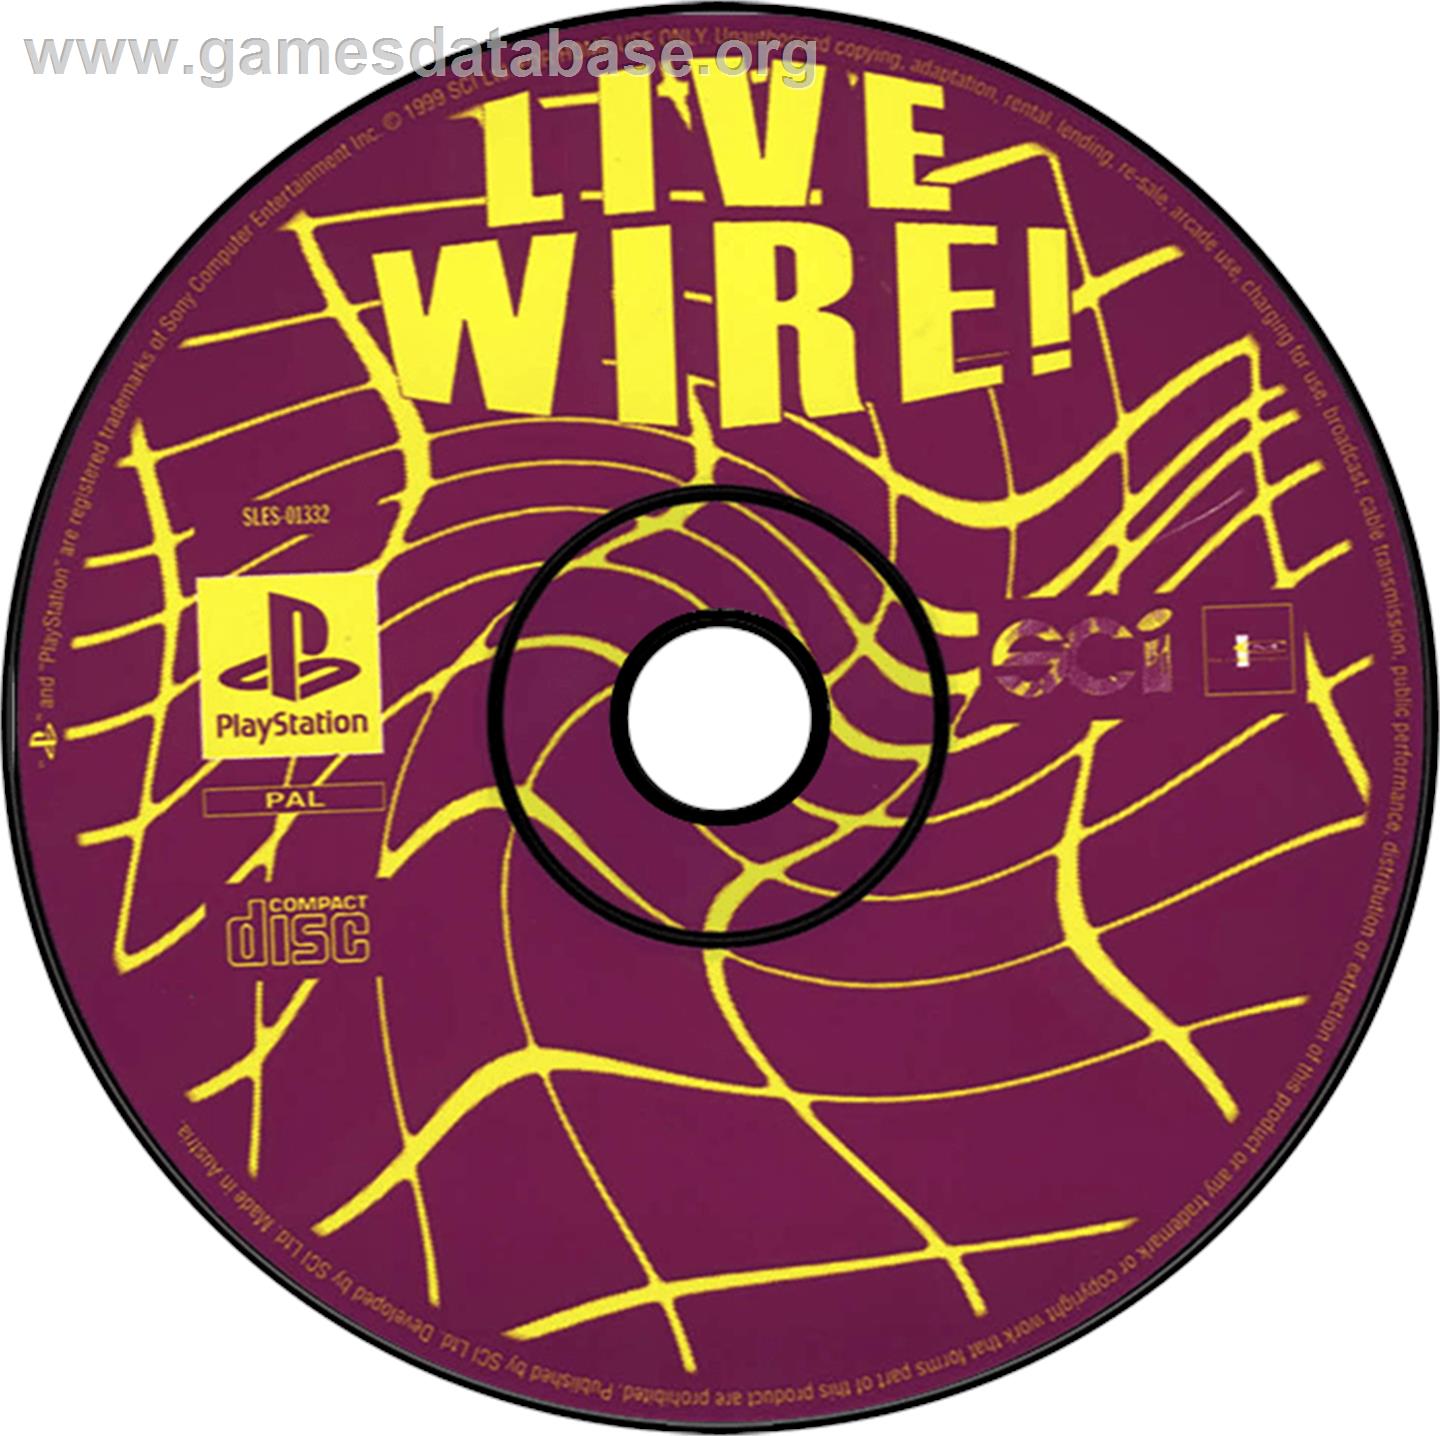 Live Wire! - Sony Playstation - Artwork - Disc